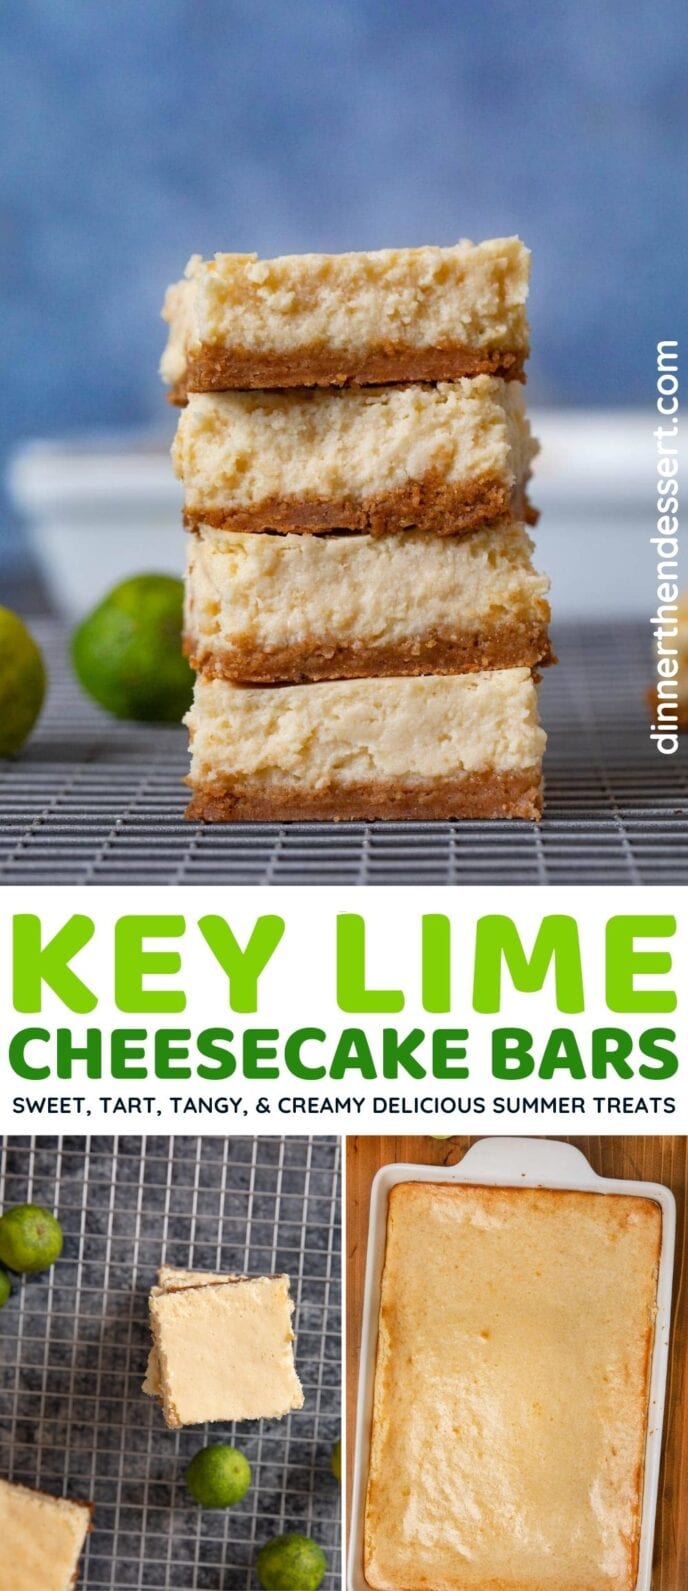 Key Lime Cheesecake Bars collage